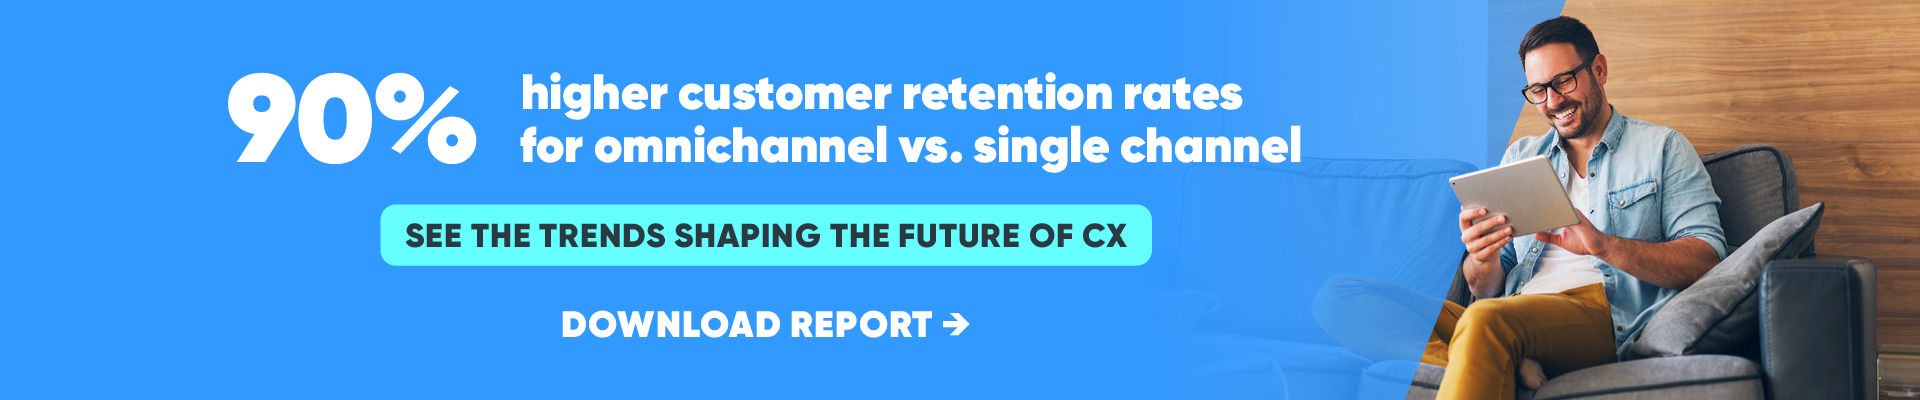 See the trends shaping the future of CX